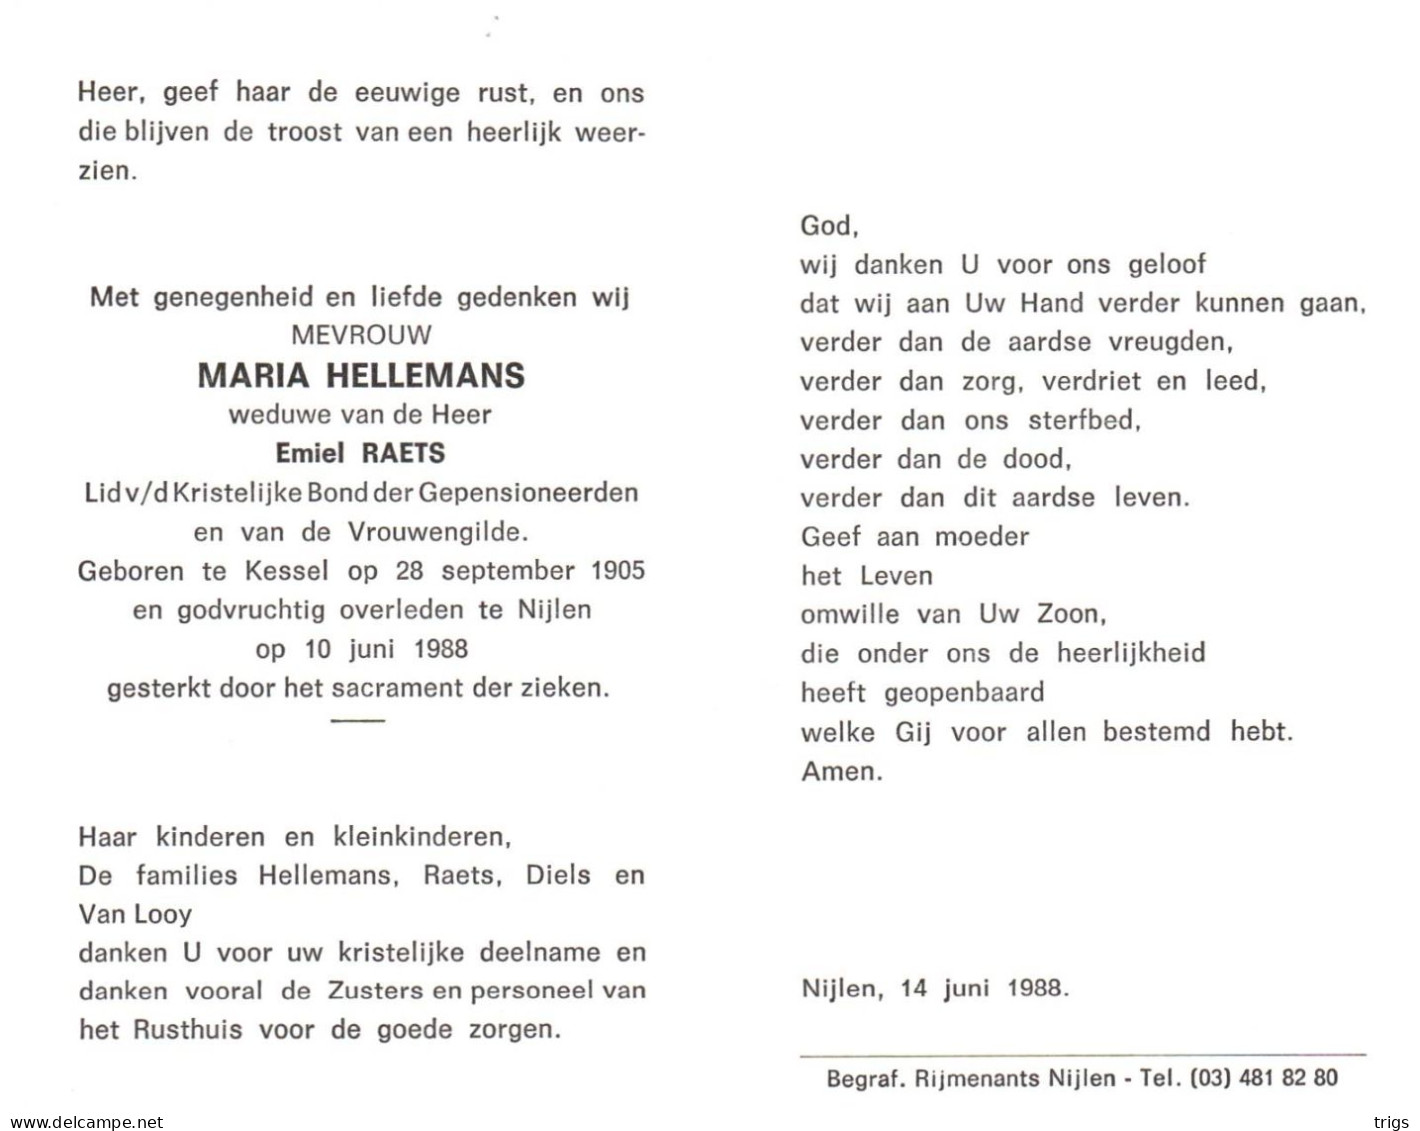 Maria Hellemans (1905-1988) - Images Religieuses